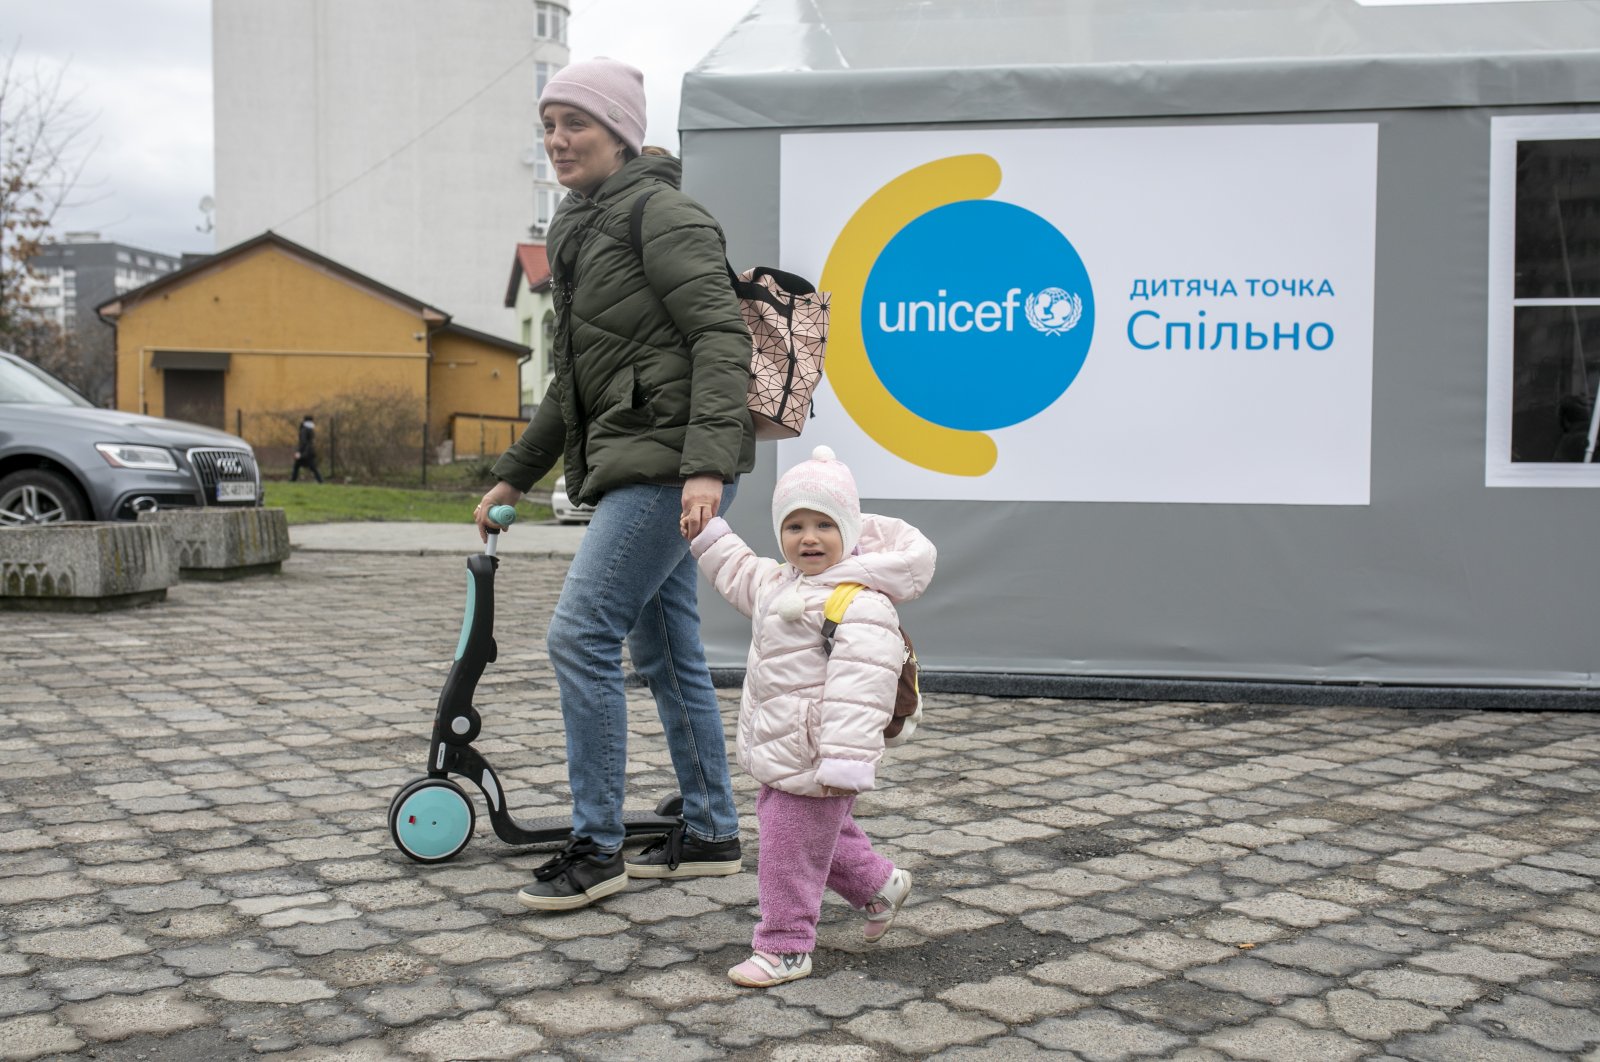 A woman walks with a small girl outside a UNICEF office. Manuel Fontaine, UNICEF director for emergency operations, and Afshan Khan, UNICEF regional director for Europe and Central Asia, together with Murat Sahin, UNICEF Representative in Ukraine, visited the Spilno center, Lviv, Ukraine, March 31, 2022. (Photo courtesy of UNICEF Turkey)